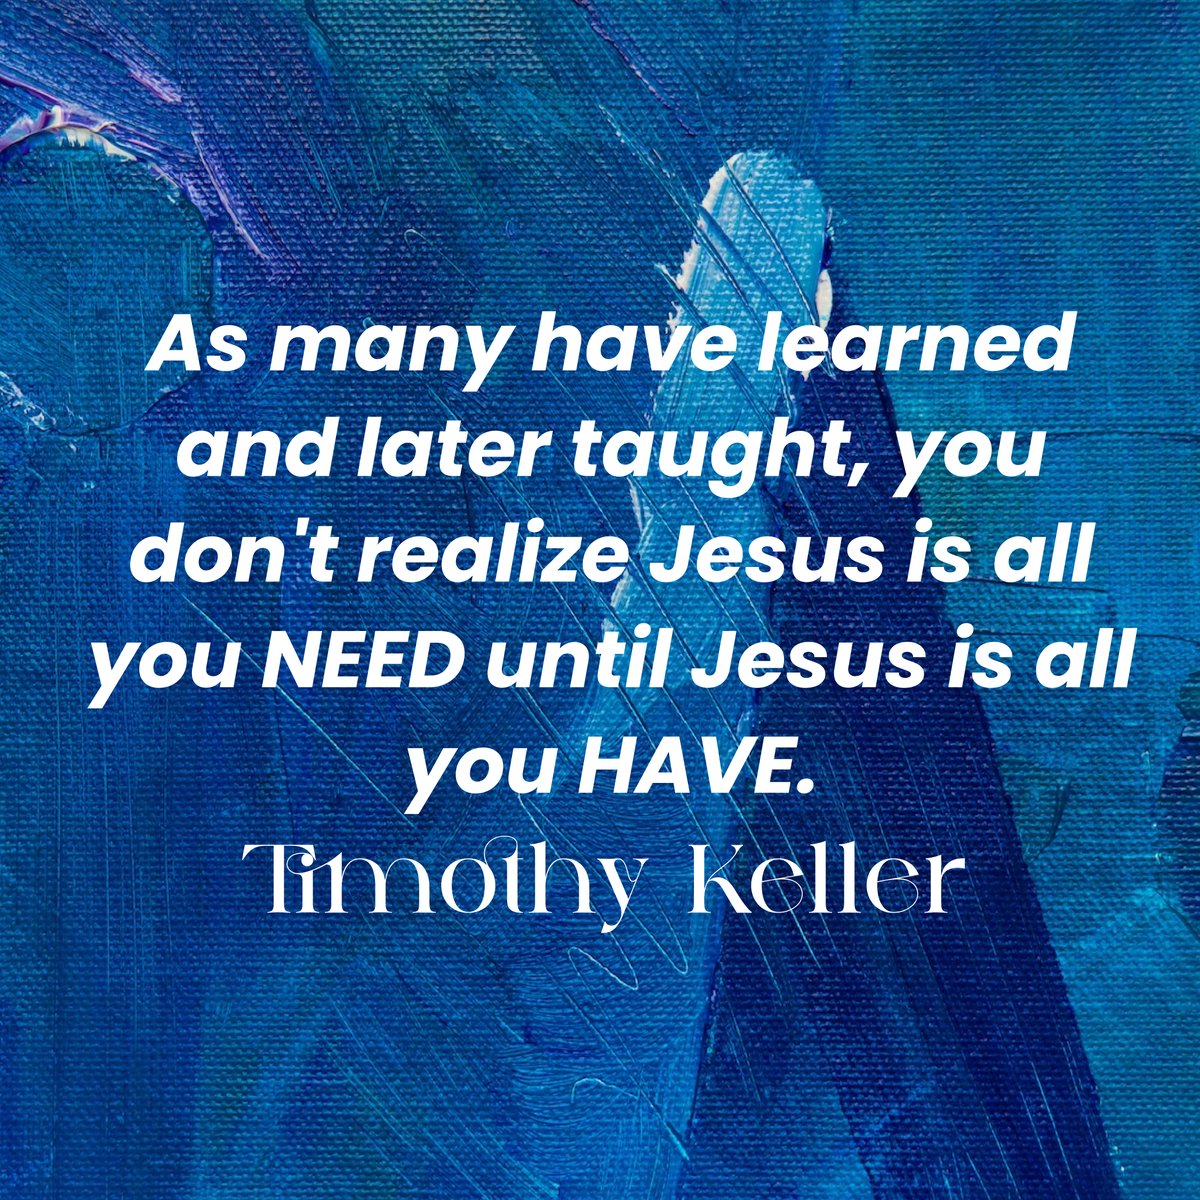 In honor of Timothy Keller -- thank you for your wisdom and your part in God's kingdom! #timothykeller #jesus #christianity #mentalhealth #thehopeline